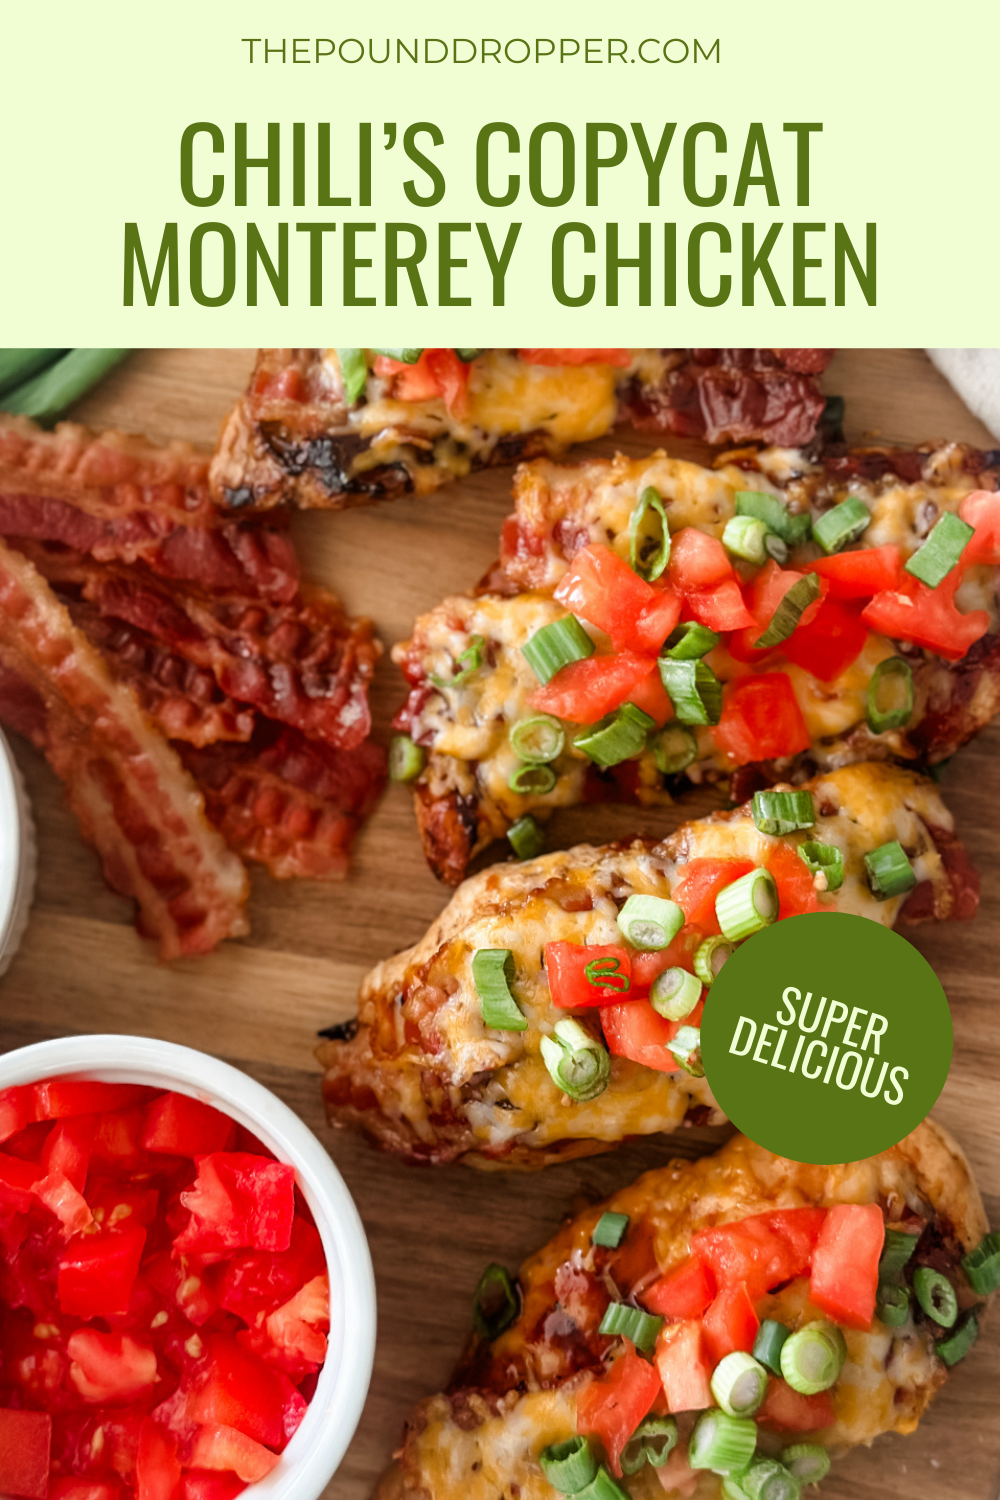 his Monterey Chicken is made with tender, juicy chicken breasts topped with a sugar free barbecue sauce, crispy bacon, melted Monterey Jack cheese, fresh tomatoes, and green onions. Truly scrumptious!! It's packed with protein, low in carbs, and will keep you full for hours! The combination of ingredients gives this dish the perfect blend of flavors!  It's a restaurant-quality dish that your whole family will love.  via @pounddropper